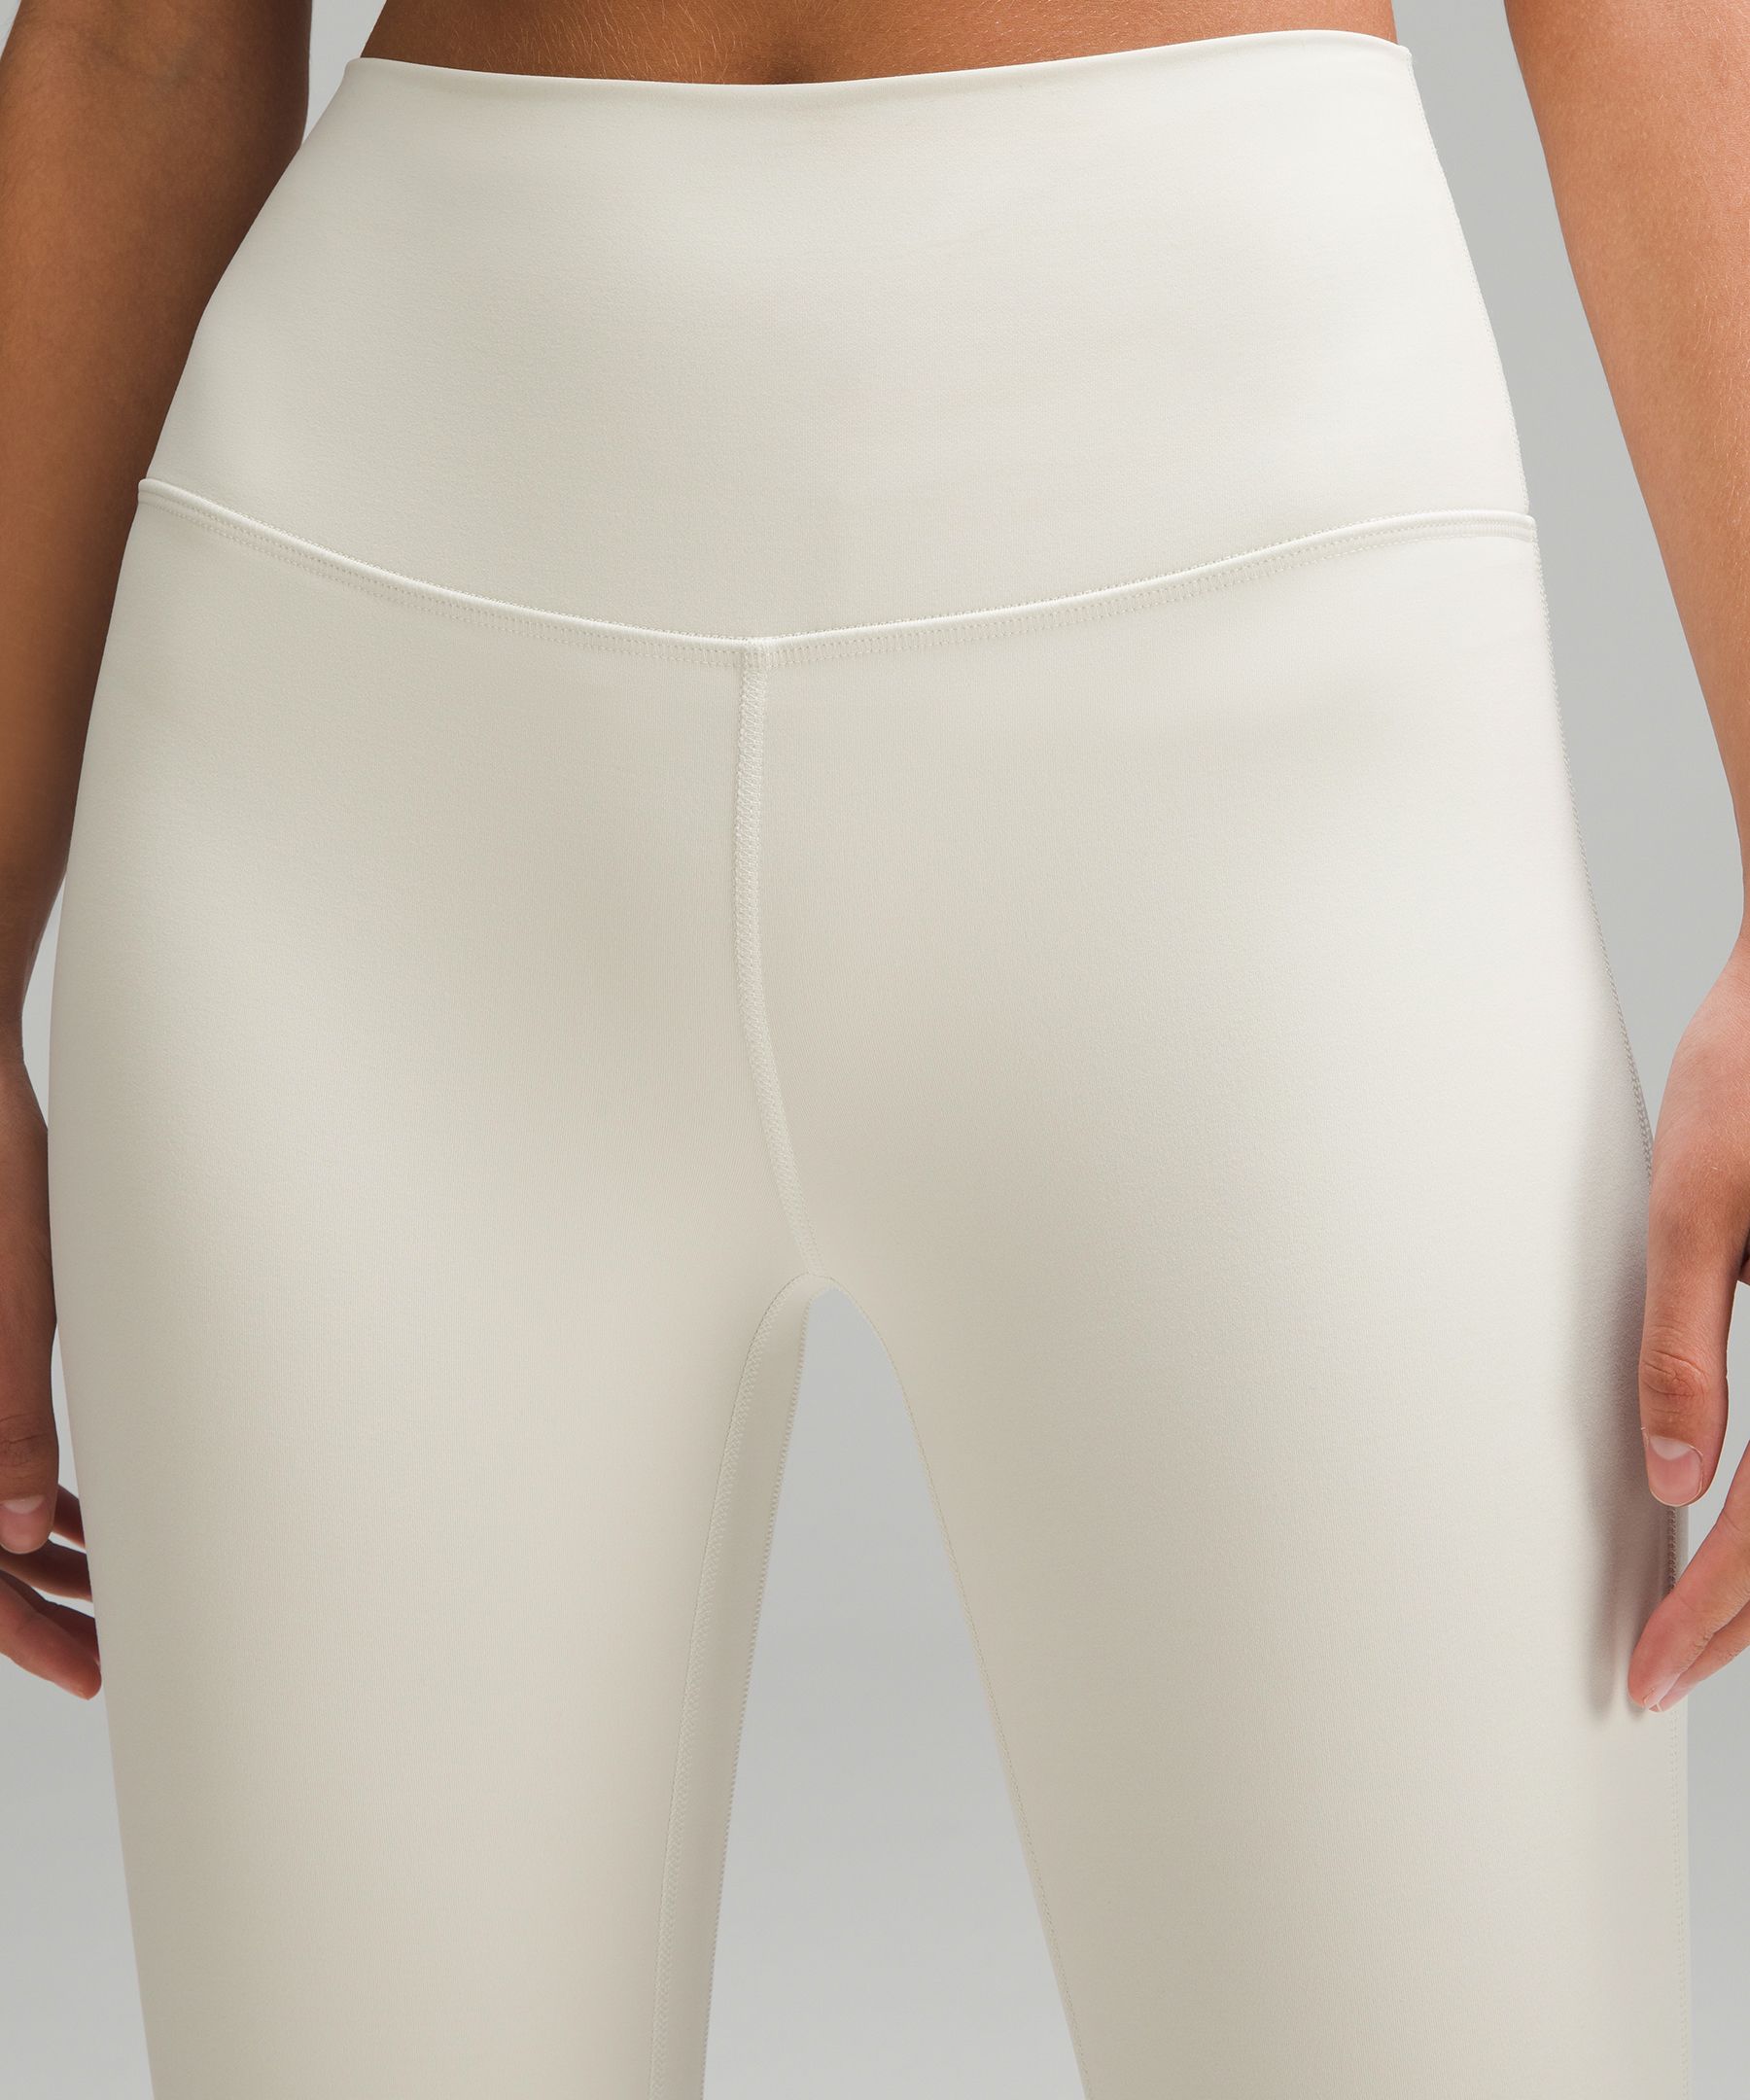 Lululemon Align Pant 28” Pink Size 2 - $75 (23% Off Retail) - From hayley